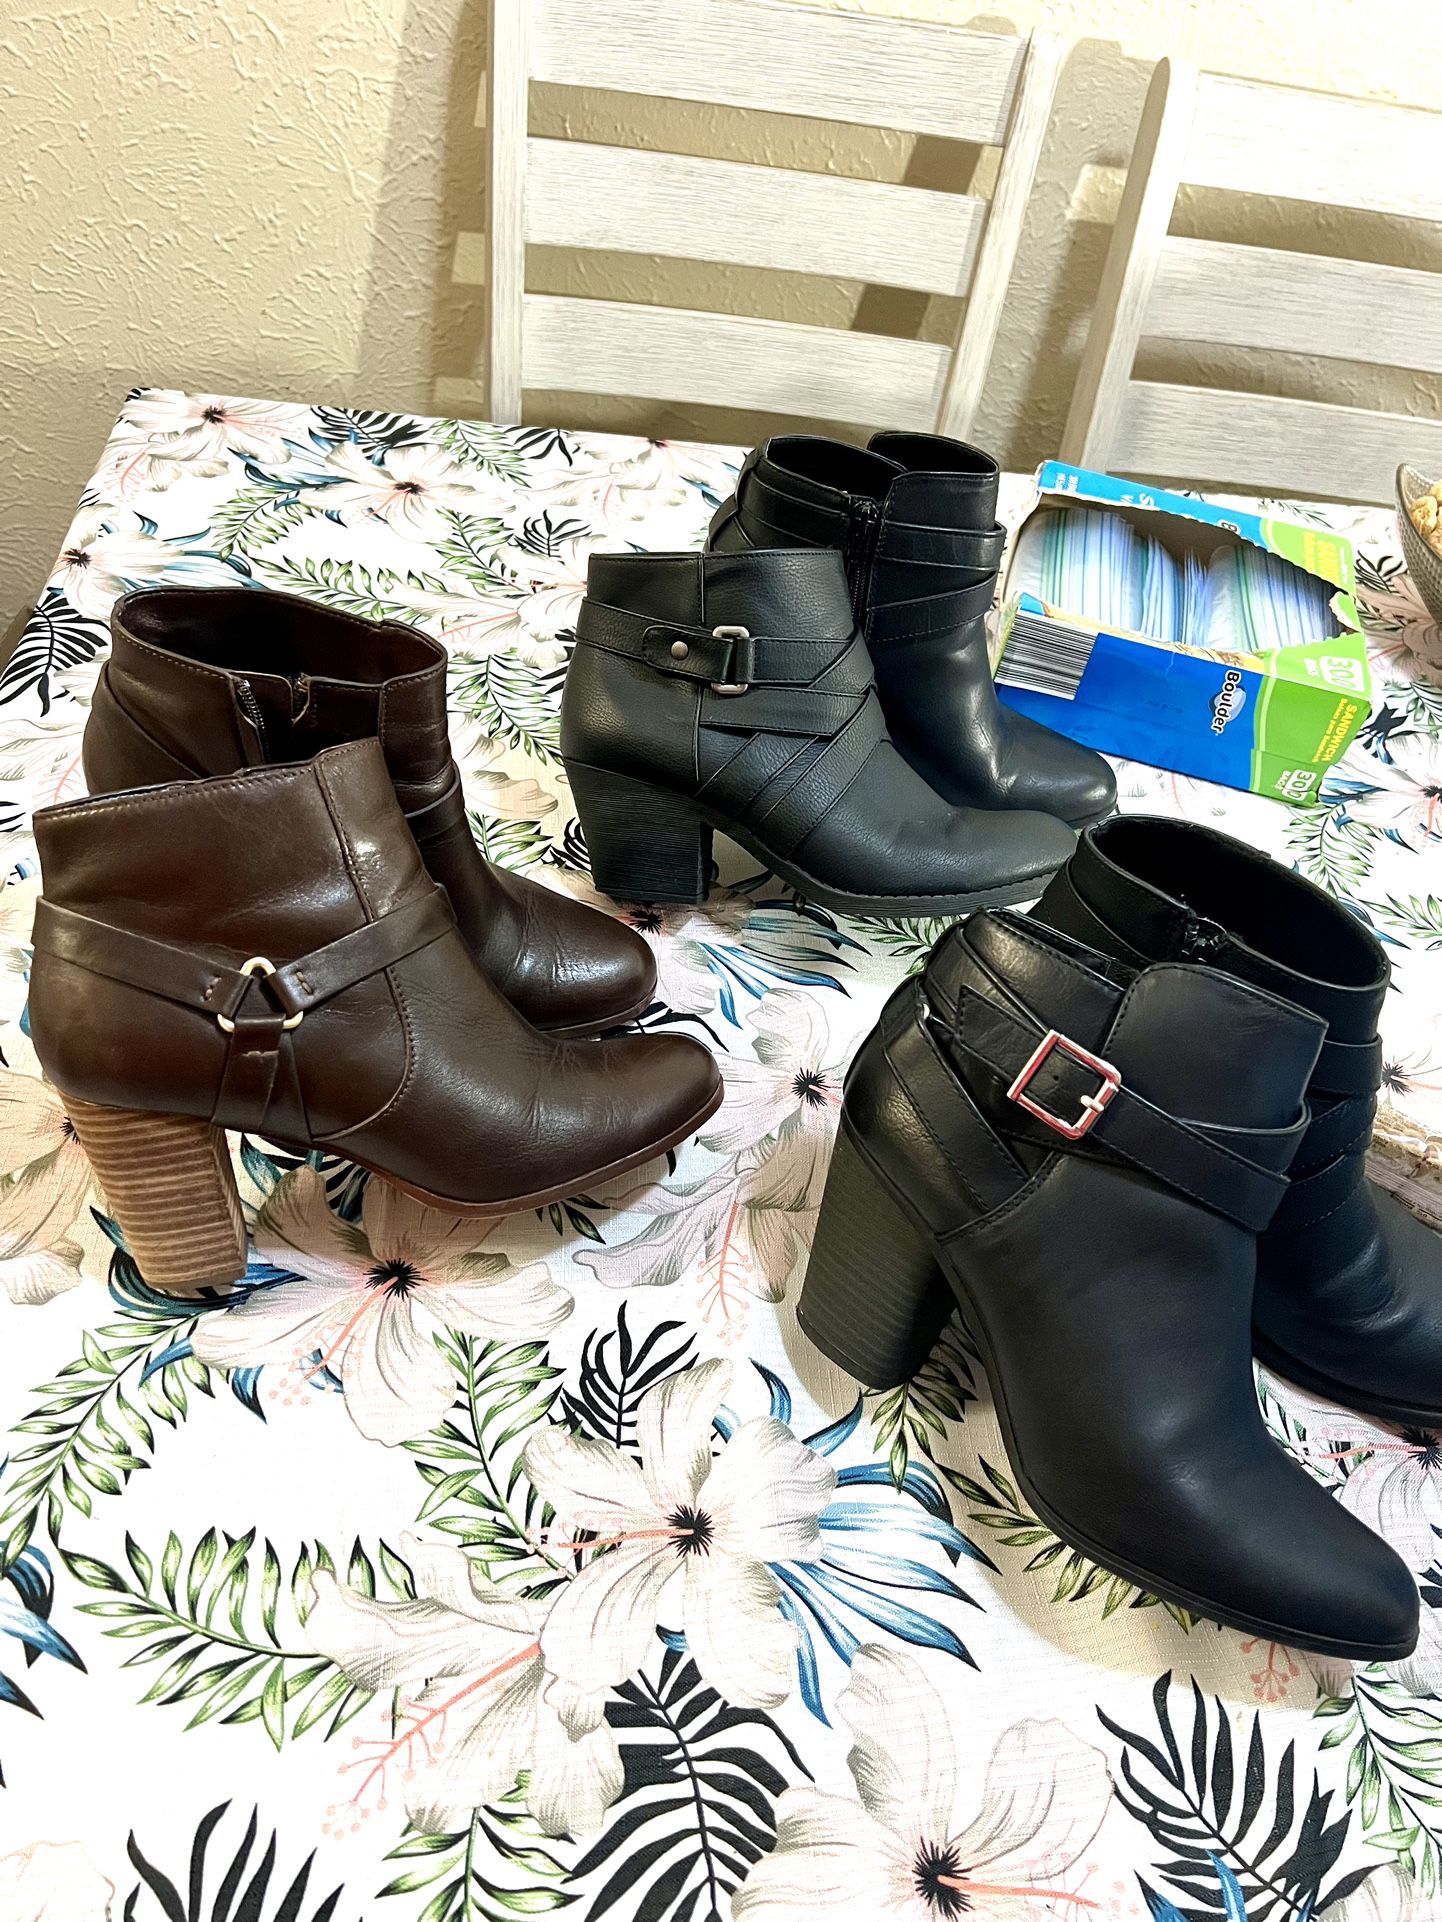 Women’s Boots Size 8-8.5 Like New 20$ For Each 